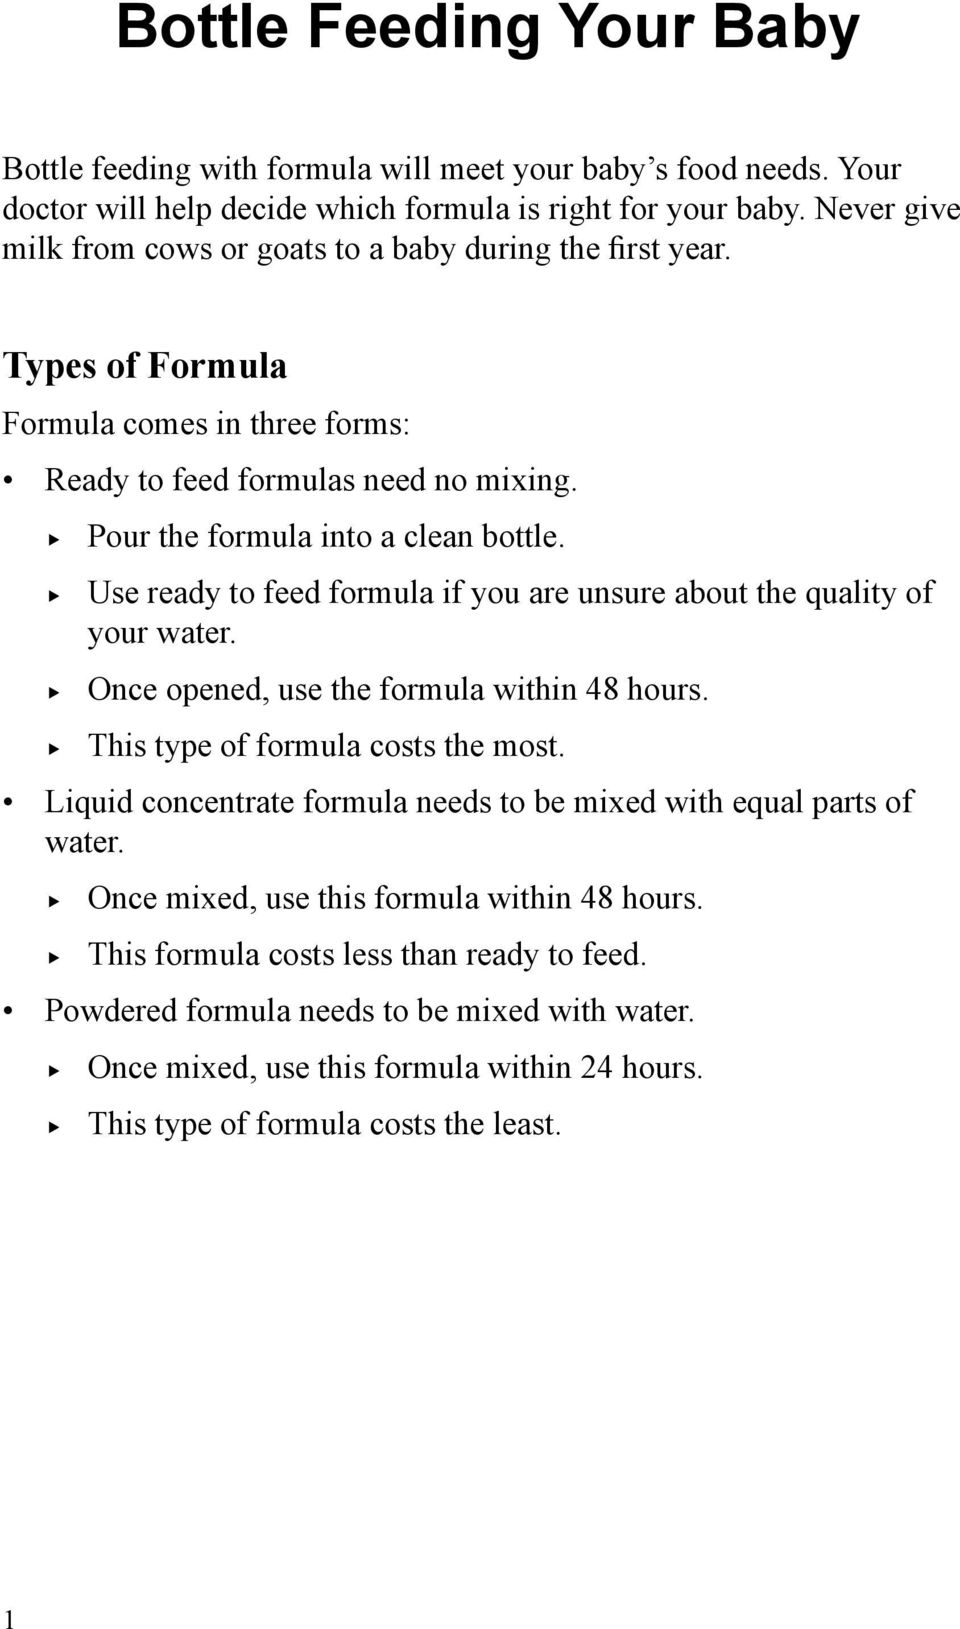 Use ready to feed formula if you are unsure about the quality of your water. Once opened, use the formula within 48 hours. This type of formula costs the most.